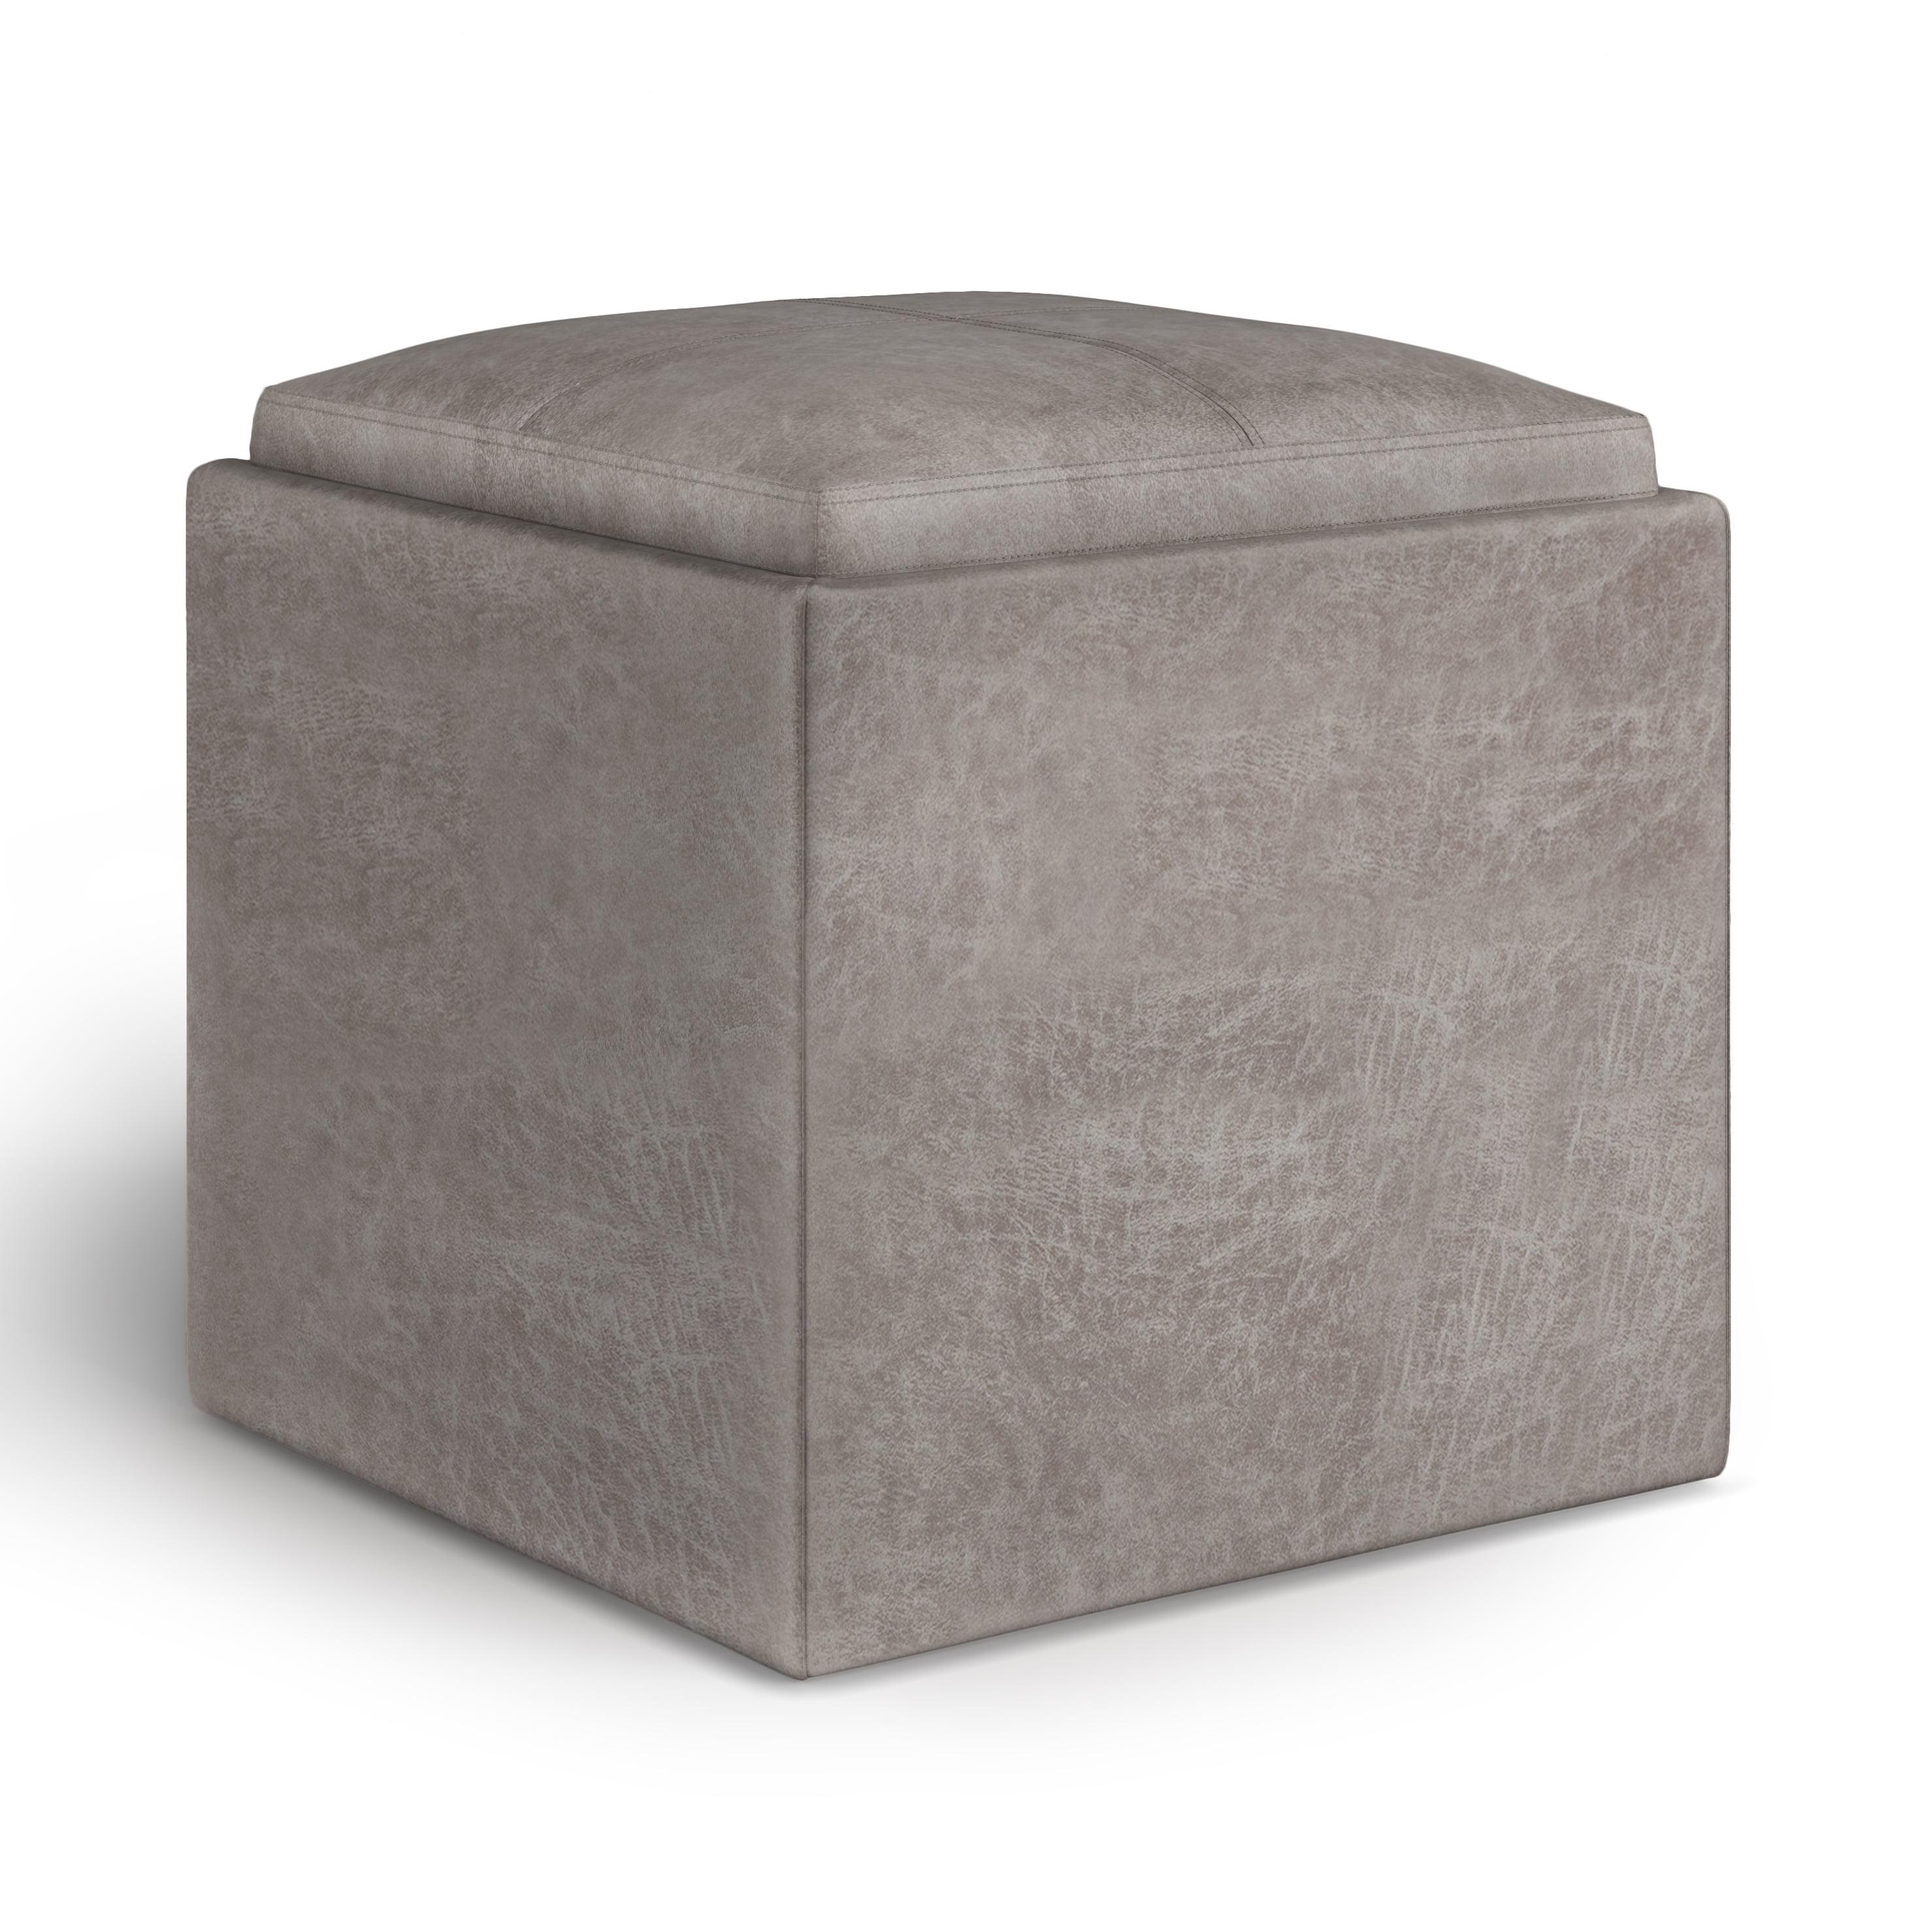 Rockwood Contemporary Square Cube Storage Ottoman in Distressed Grey